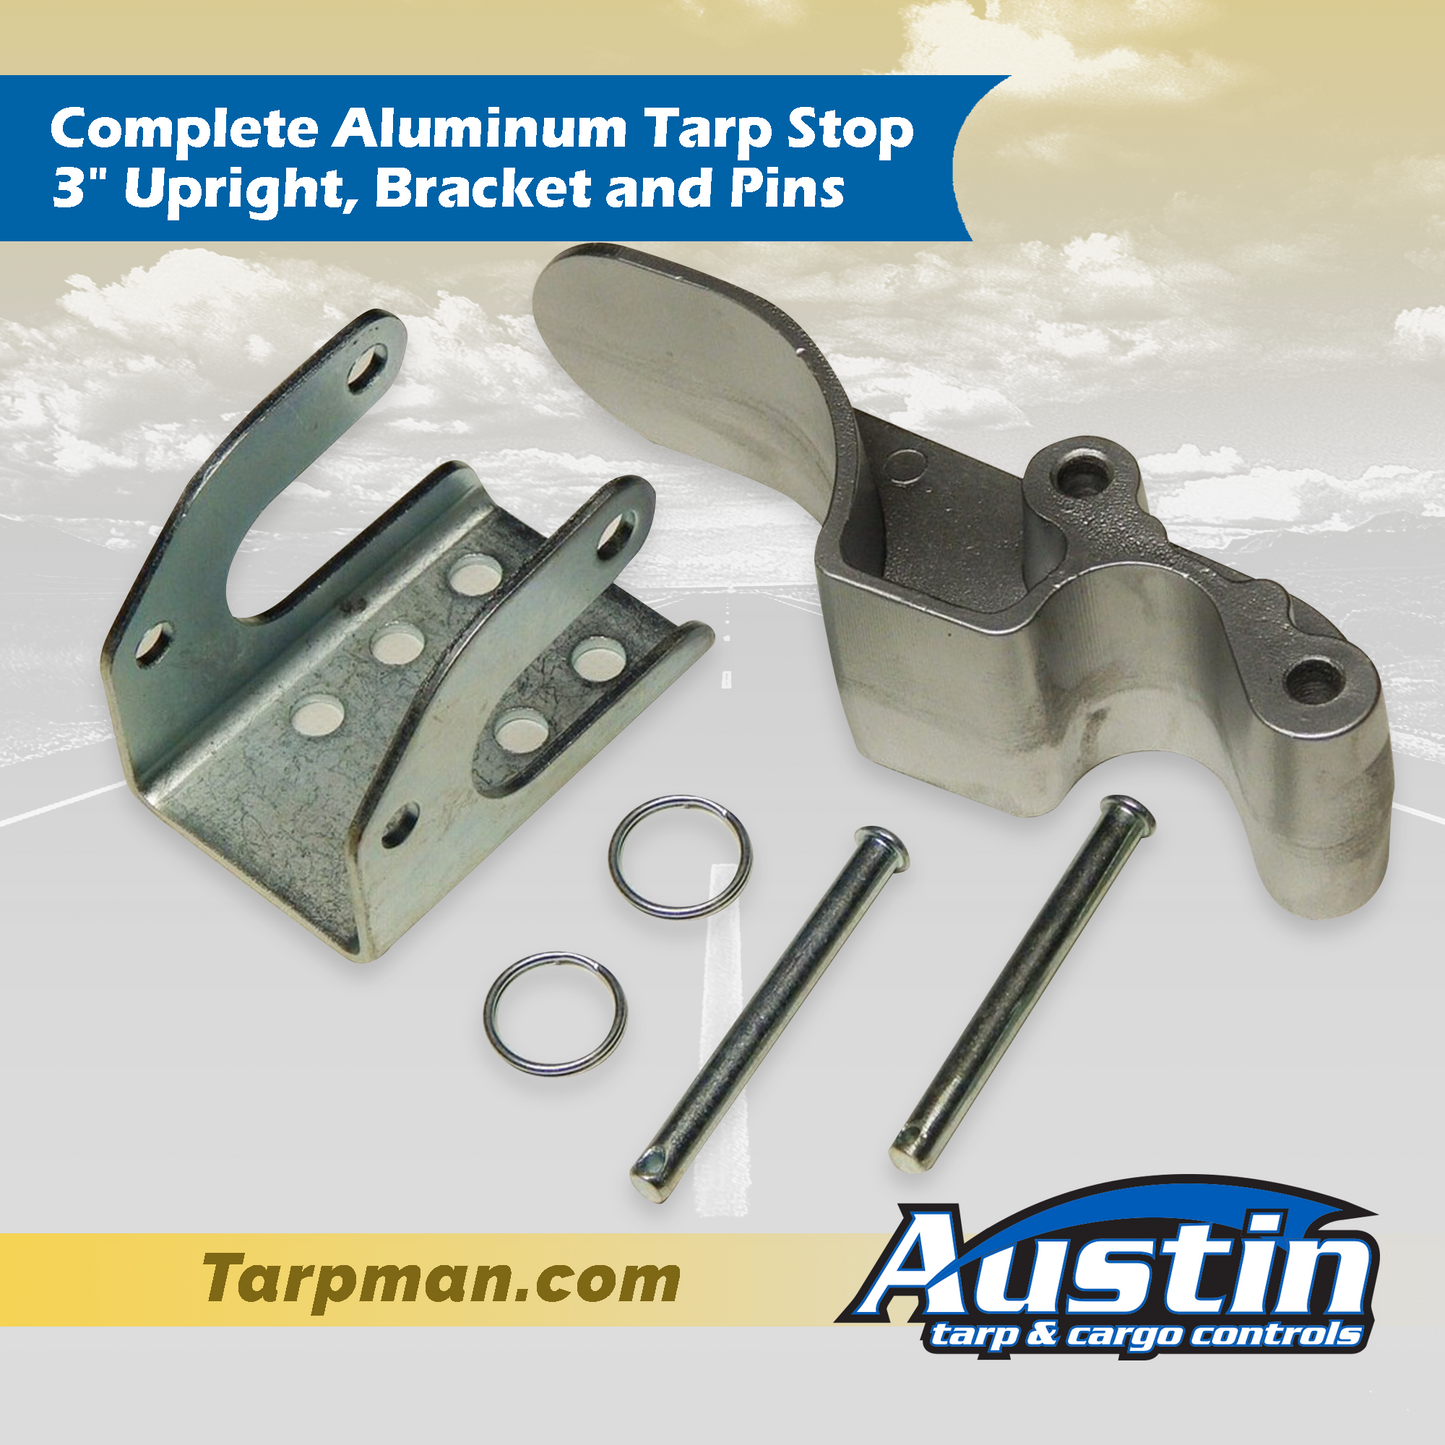 Complete Aluminum Tarp Stop - 3" Upright, Bracket and Pins